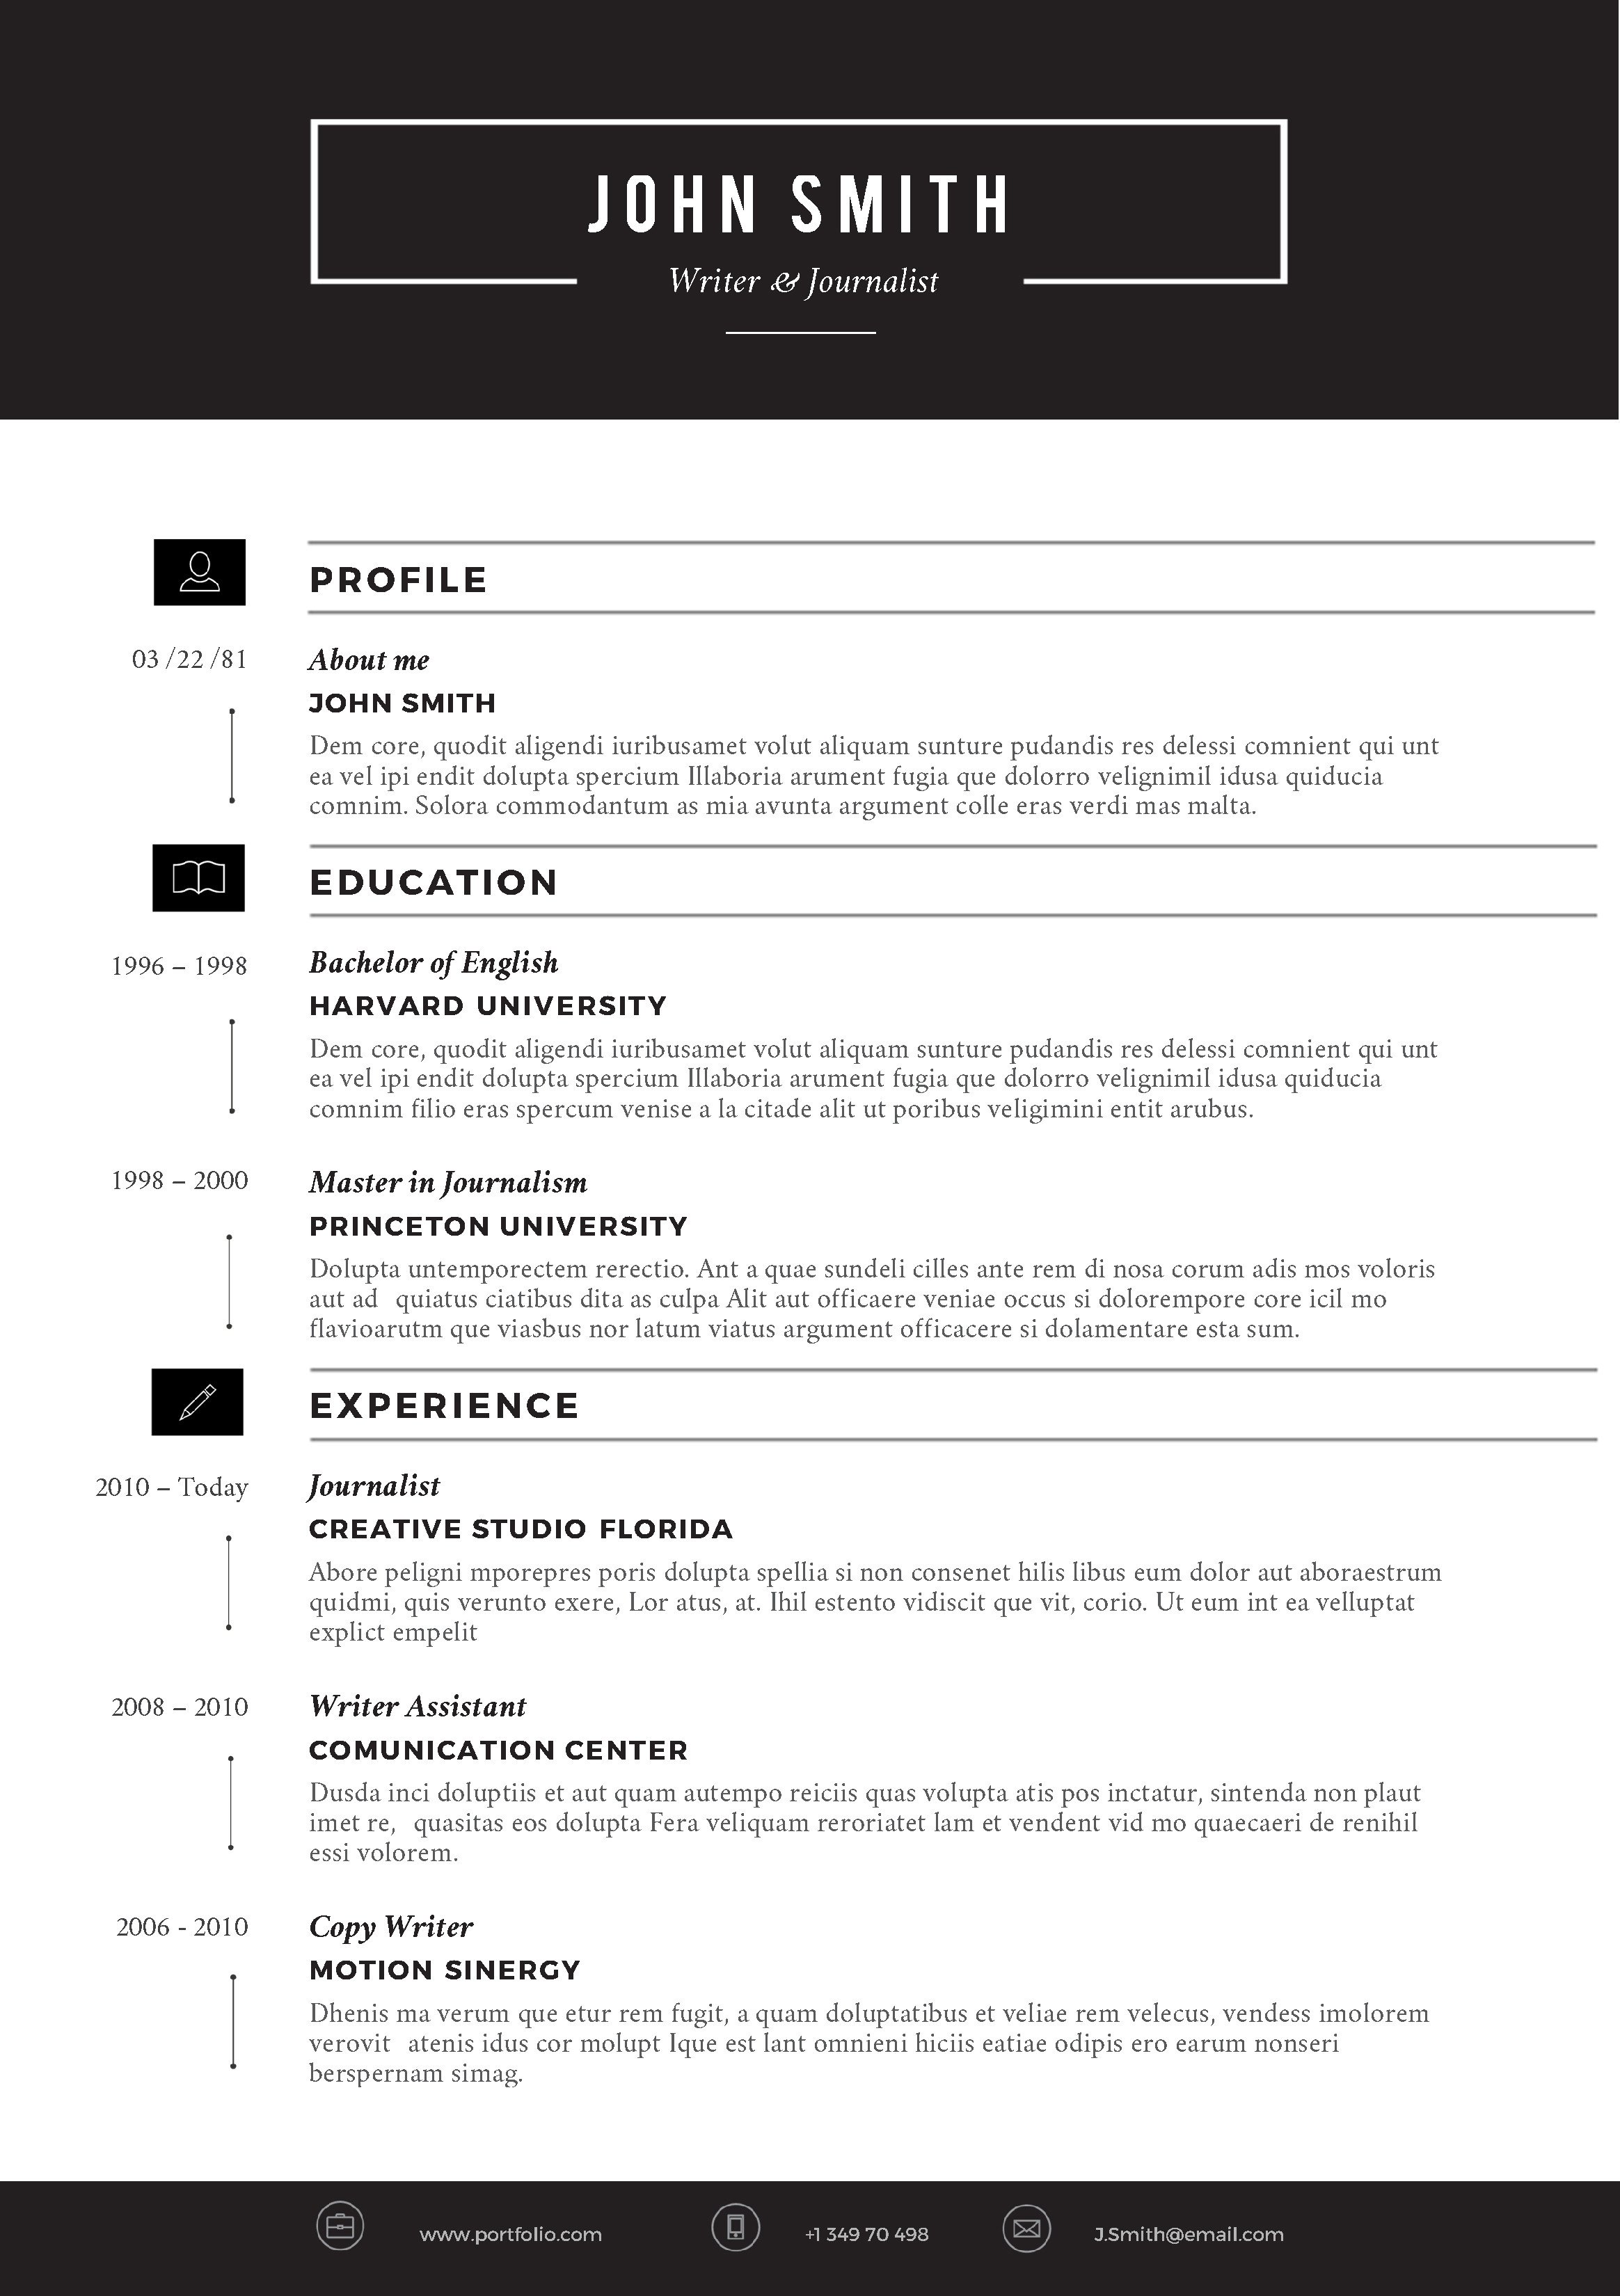 Microsoft Word Resume Template Download Creative Resume Template by Cvfolio Resumes